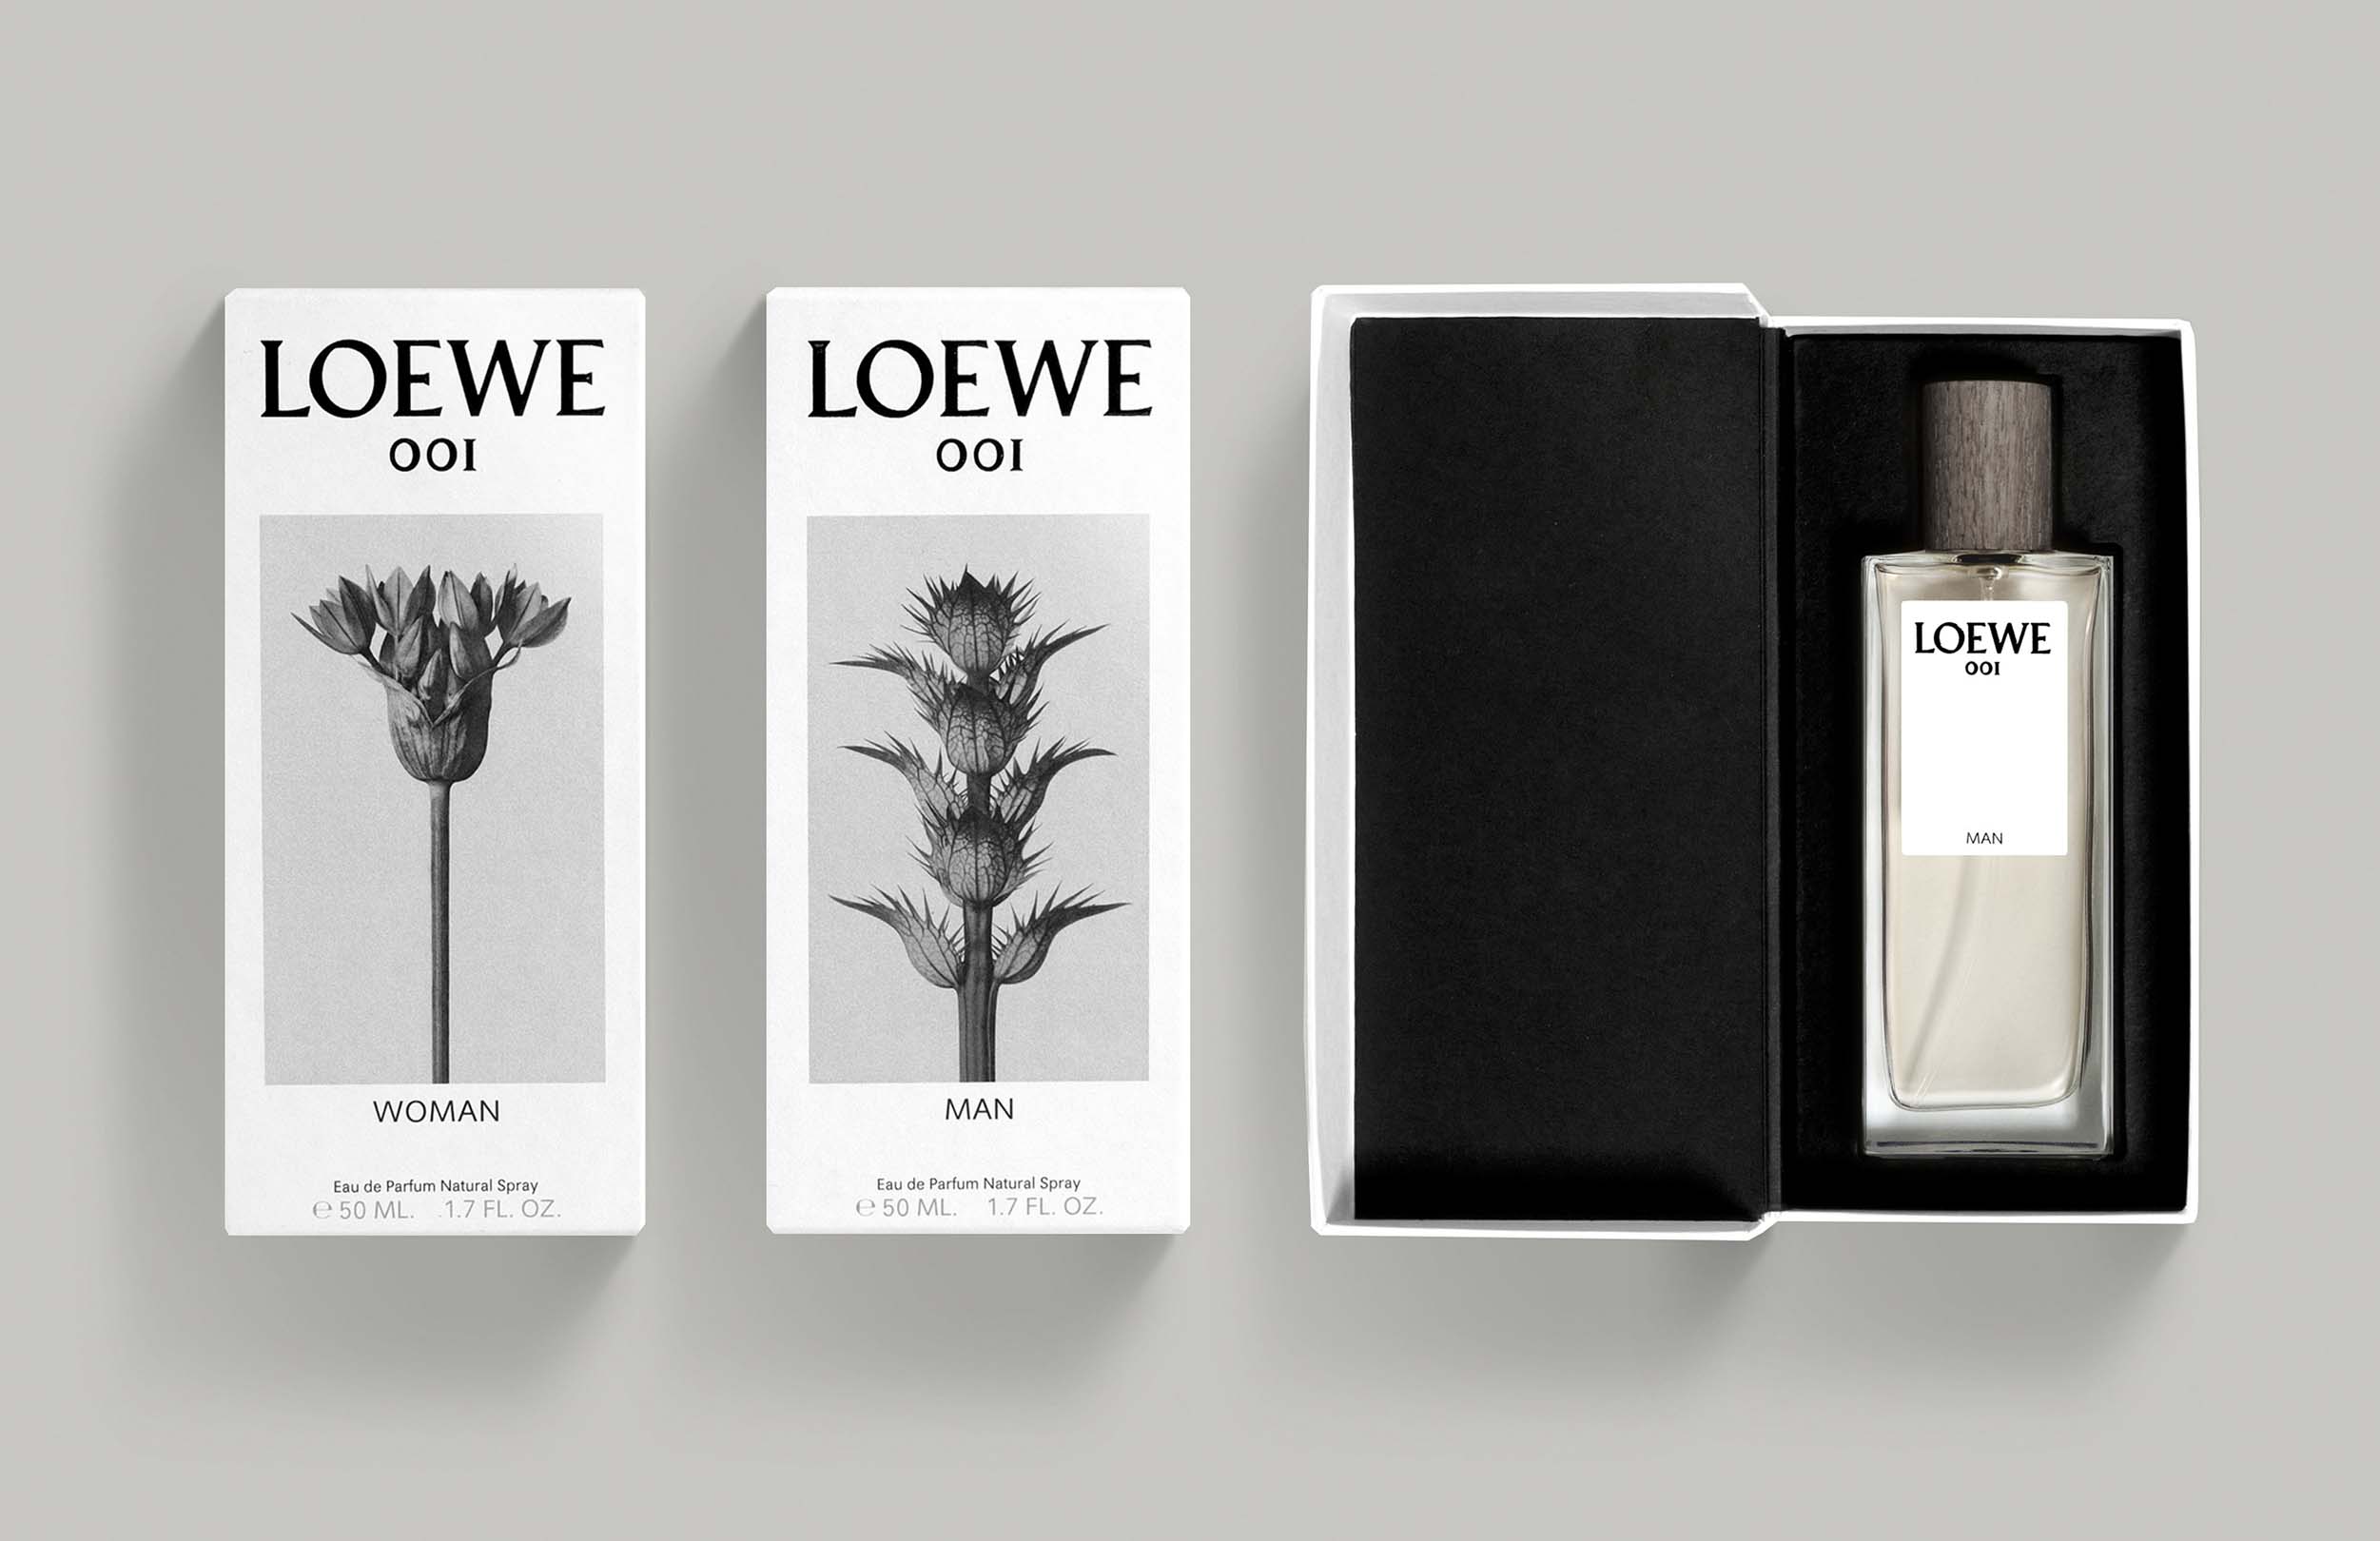 Loewe Parfum - A Light Group Study - Finished Projects - Blender